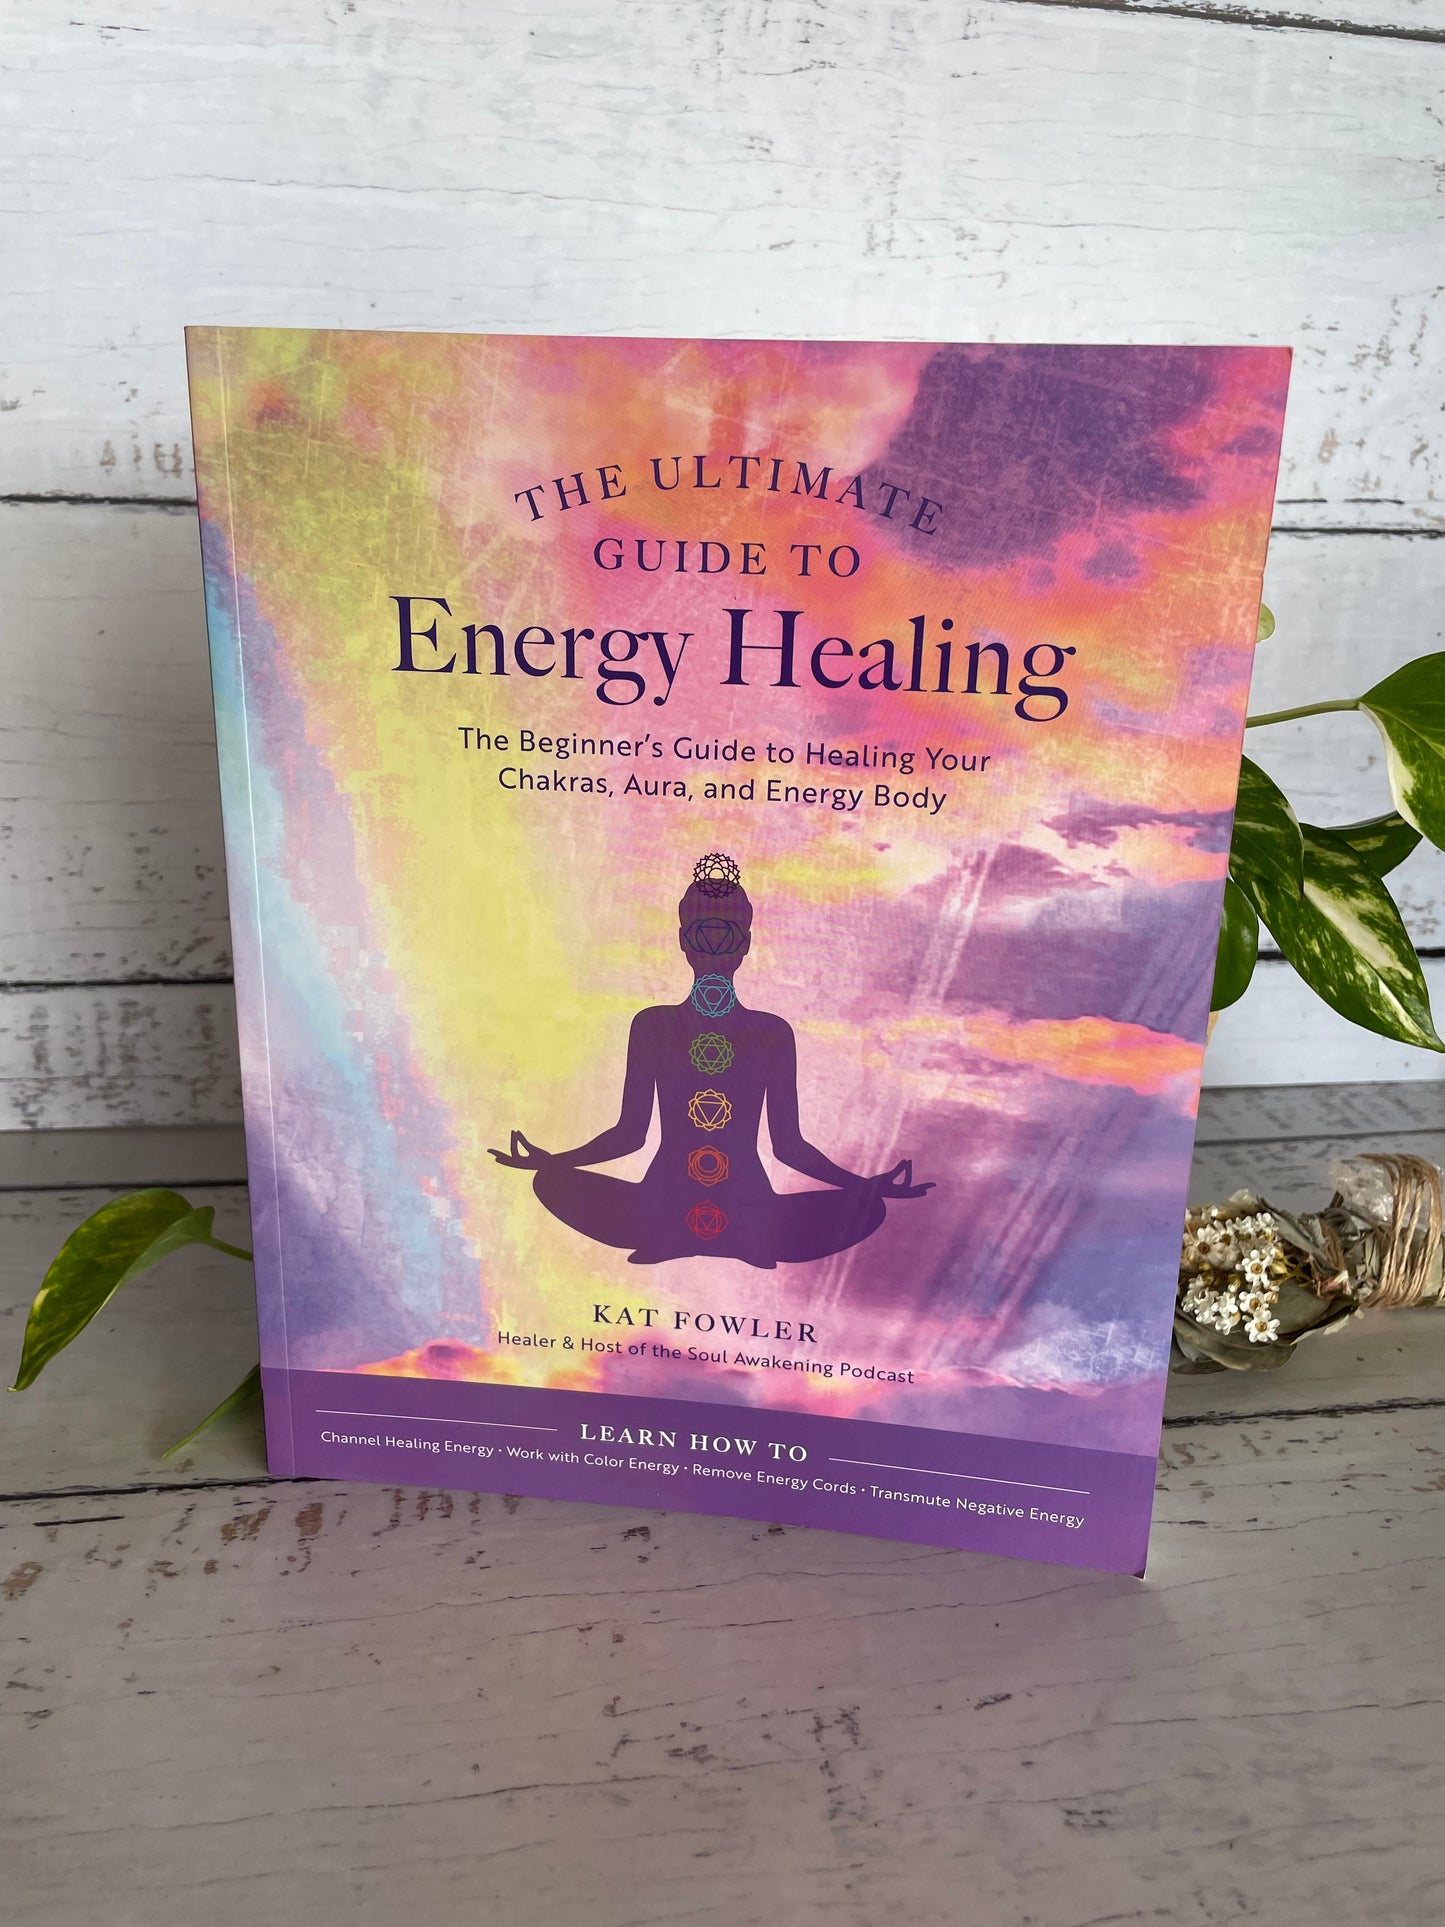 The Ultimate Guide to Energy Healing